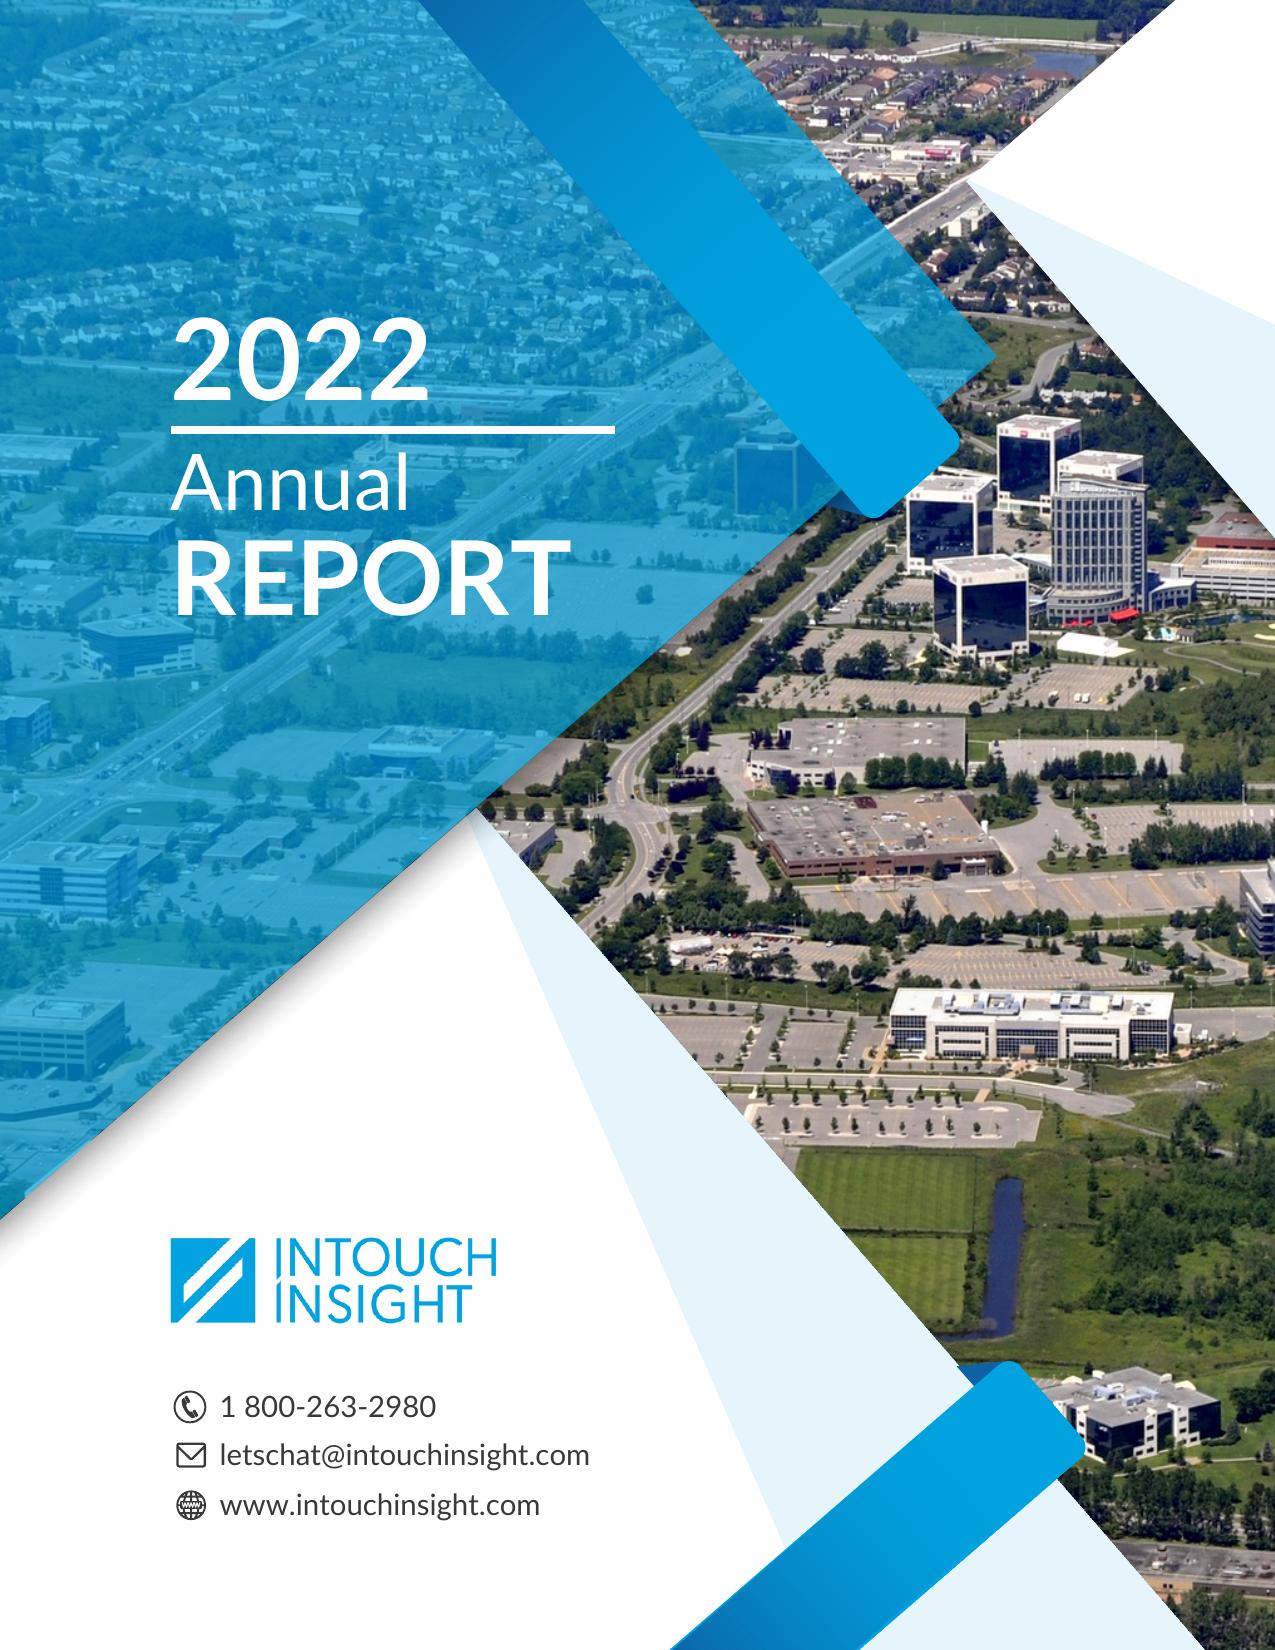 INTOUCHINSIGHT 2022 Annual Report